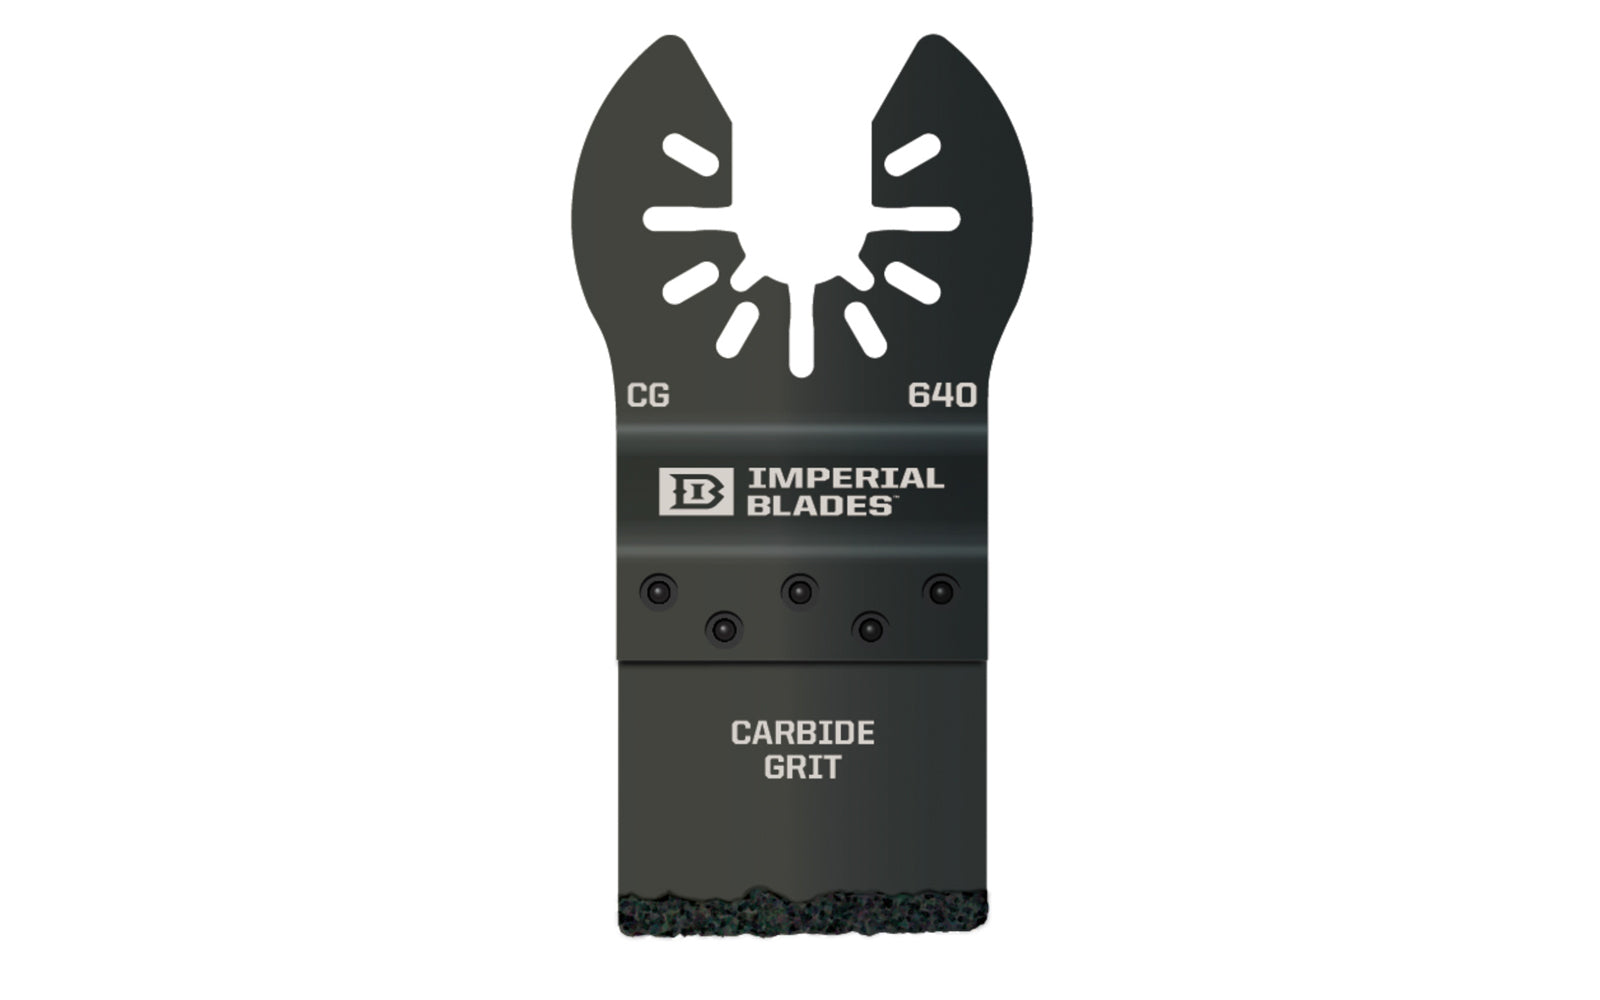 Imperial Blades "One Fit" 1-1/4" Carbide Grit Plunge Cut Blade. Ideal for precise plunge cuts. Recommended applications: Tile Grout. Popular projects: Removing stubborn grout between tiles without damaging tile edges & making plunge cuts in plaster & other soft porous materials. Model IBOA640-1. Made in USA.   